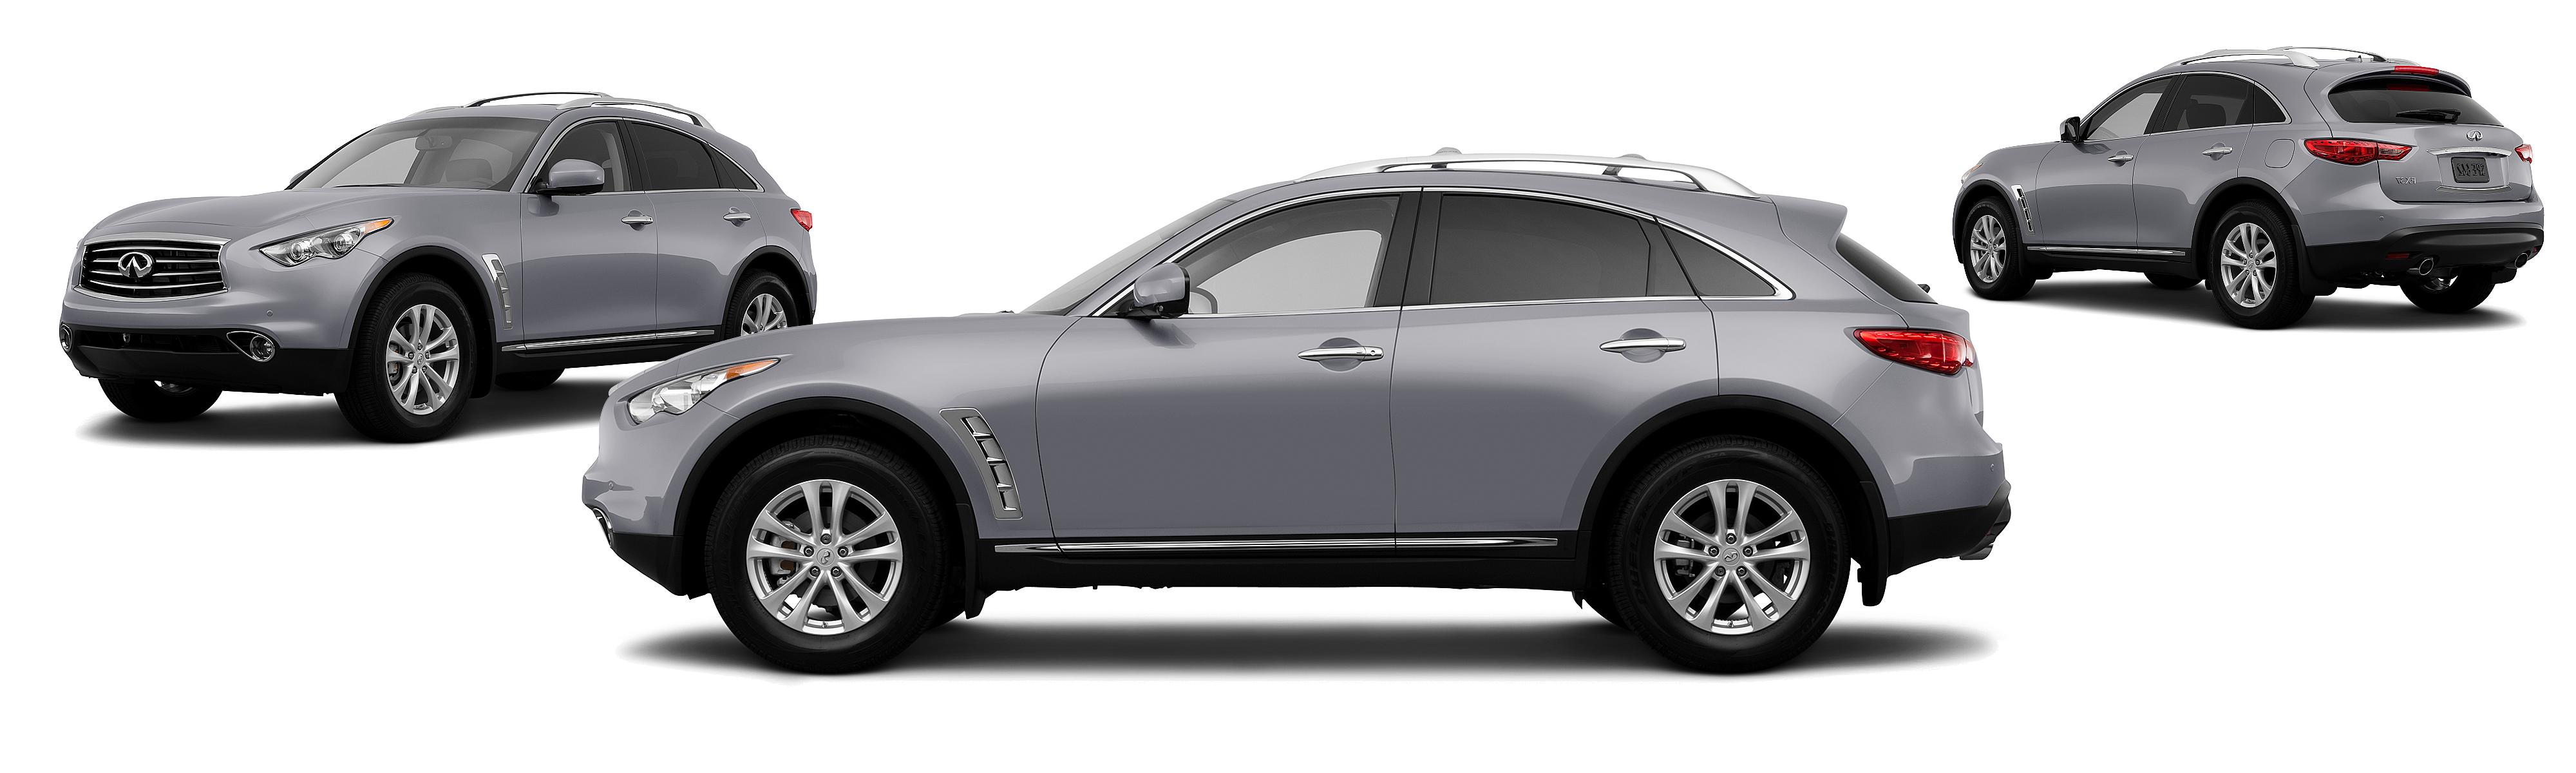 2013 INFINITI FX37 AWD 4dr SUV - Research - GrooveCar